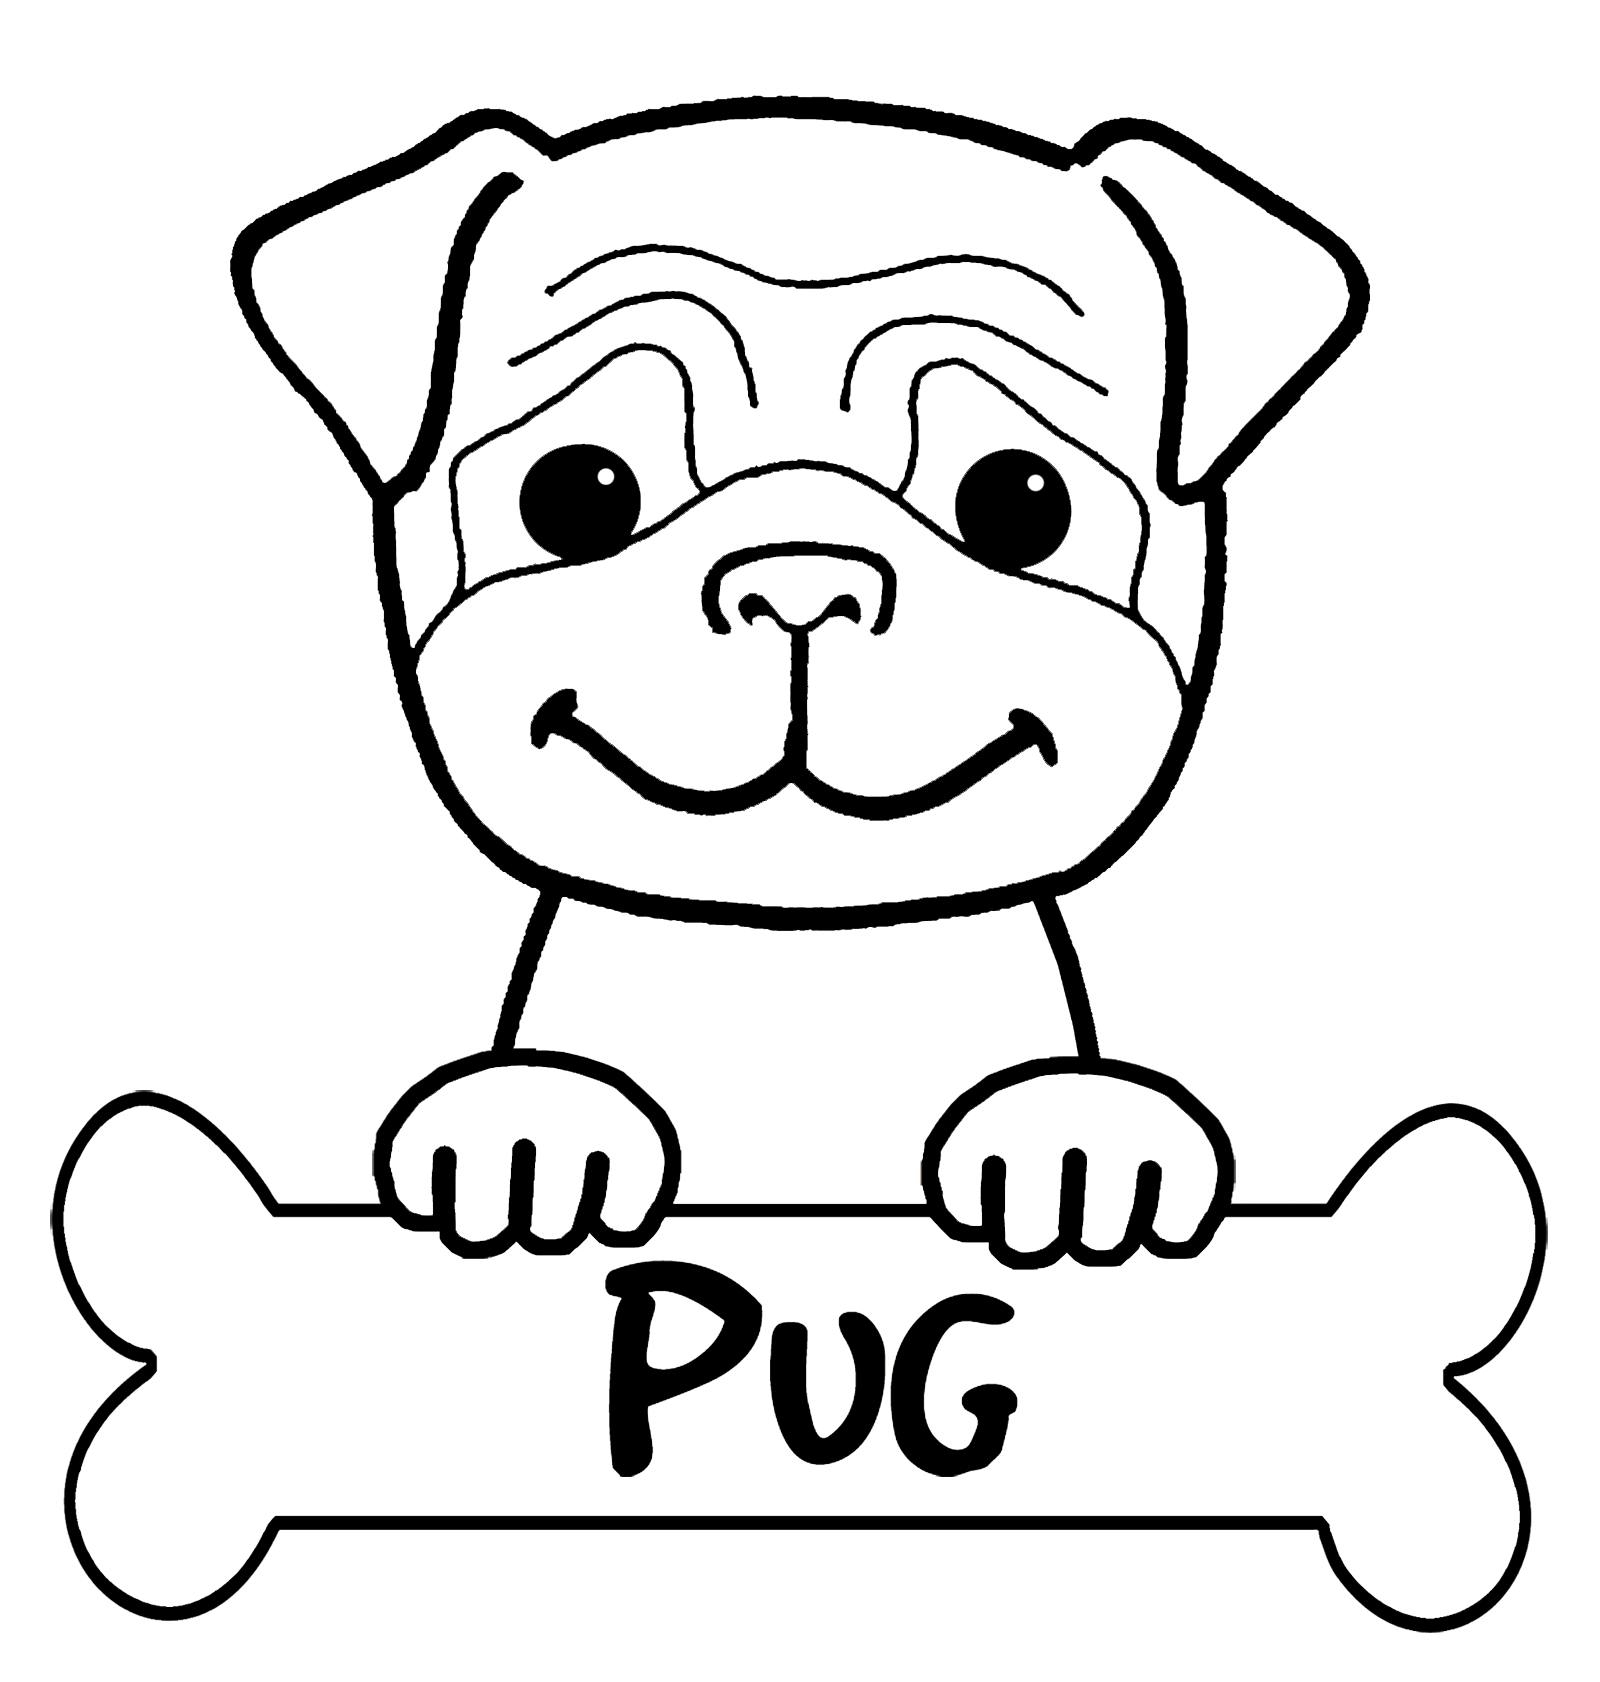 Dog Pug Coloring For Kids Coloring Page